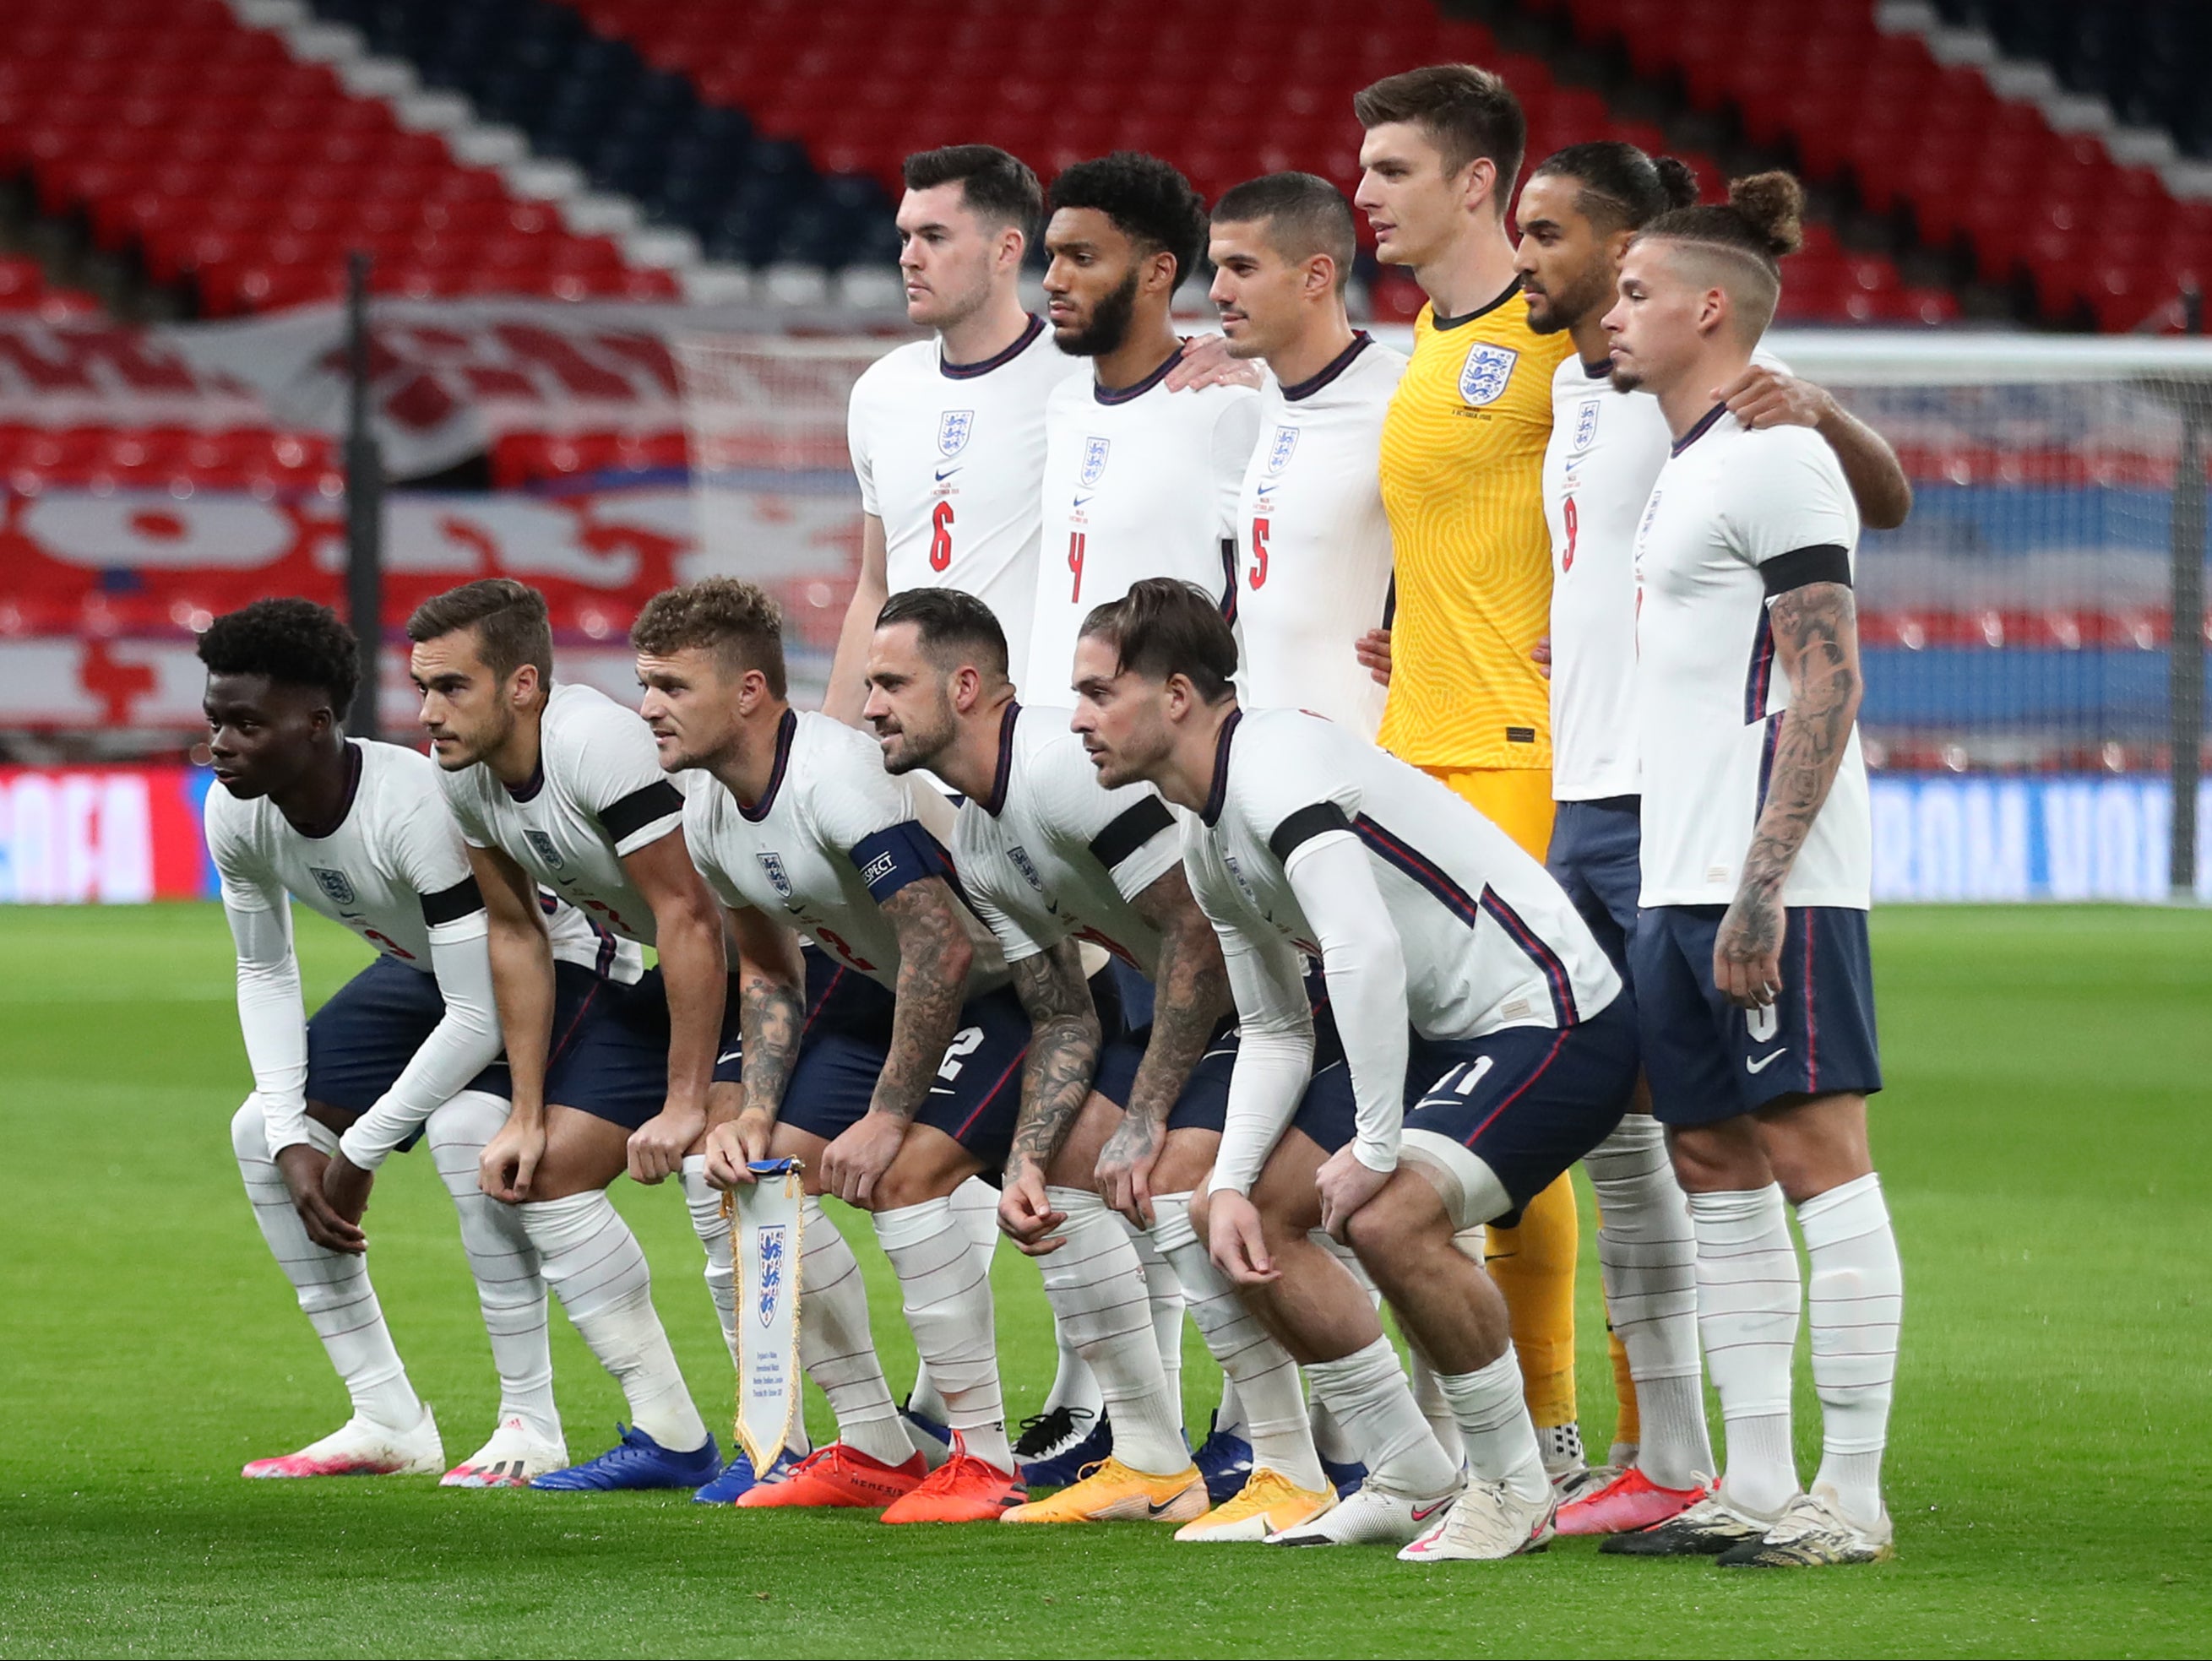 England’s starting line-up from 3-0 friendly over Wales